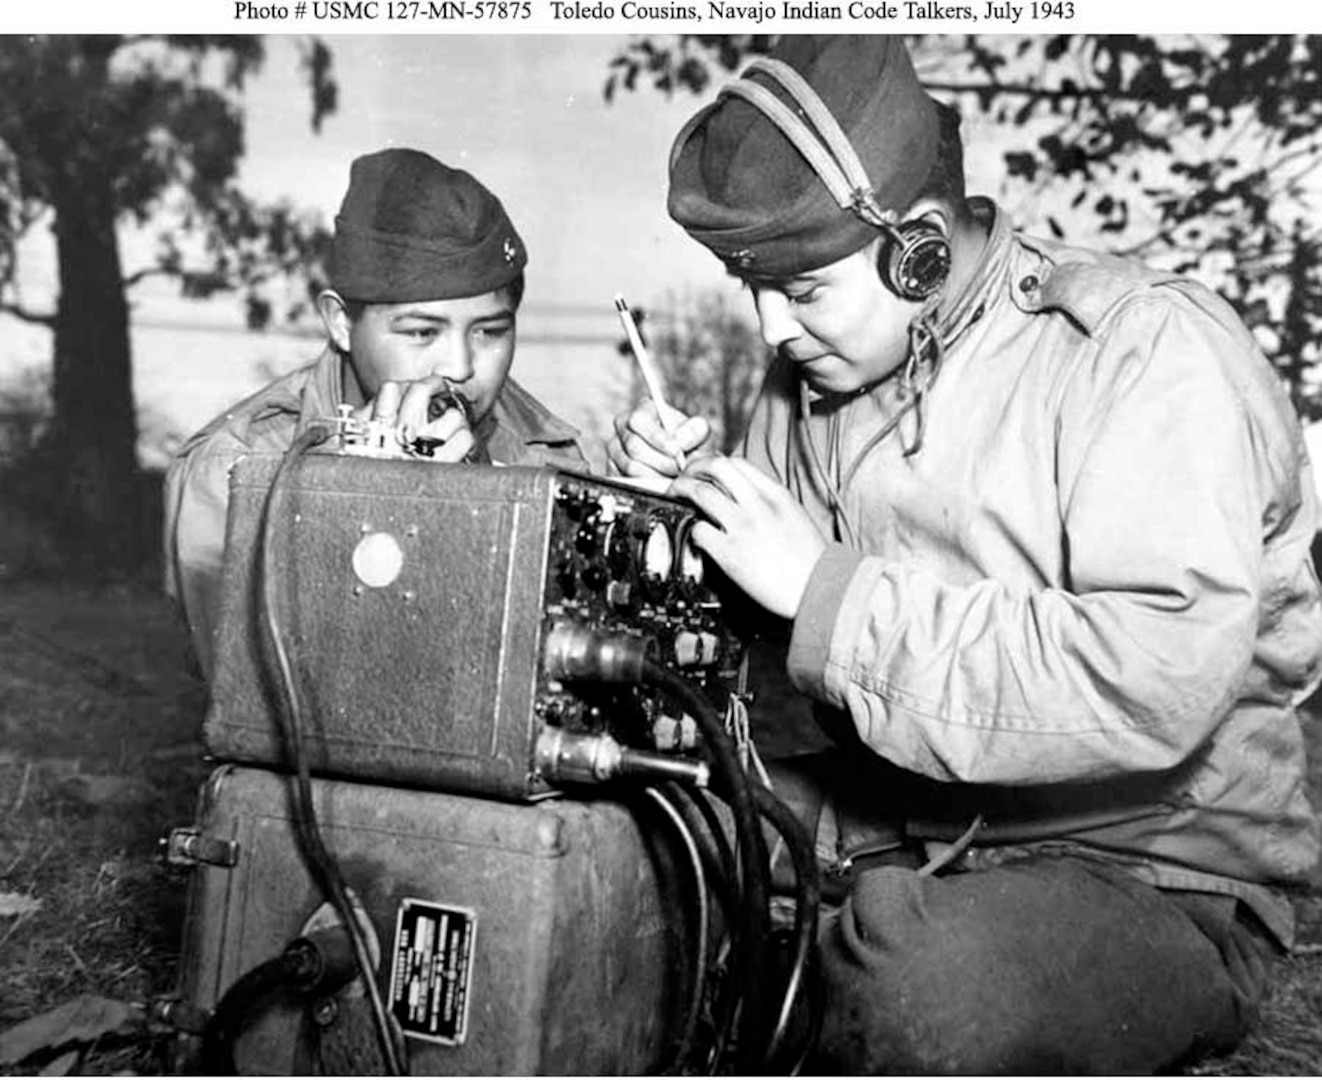 Marine Pfcs. Preston Toledo and Frank Toledo, both Navajo Code Talkers and cousins, relay orders in the Navajo language on a field radio. They were attached to a Marine artillery regiment in the South Pacific. This photo was taken July 7, 1943.